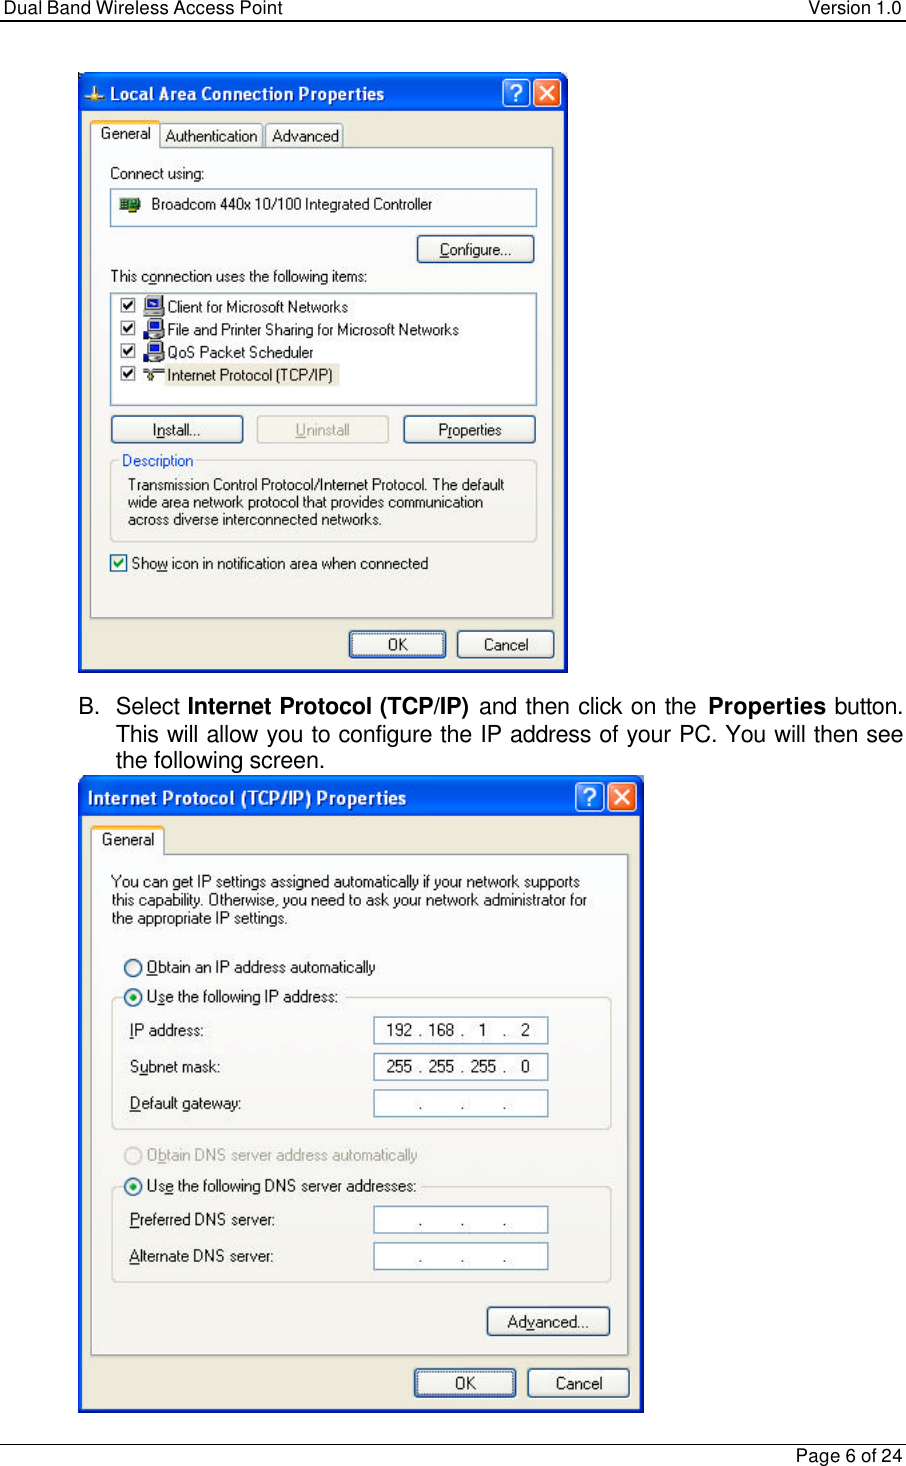 Dual Band Wireless Access Point Version 1.0Page 6 of 24B. Select Internet Protocol (TCP/IP) and then click on the Properties button.This will allow you to configure the IP address of your PC. You will then seethe following screen.